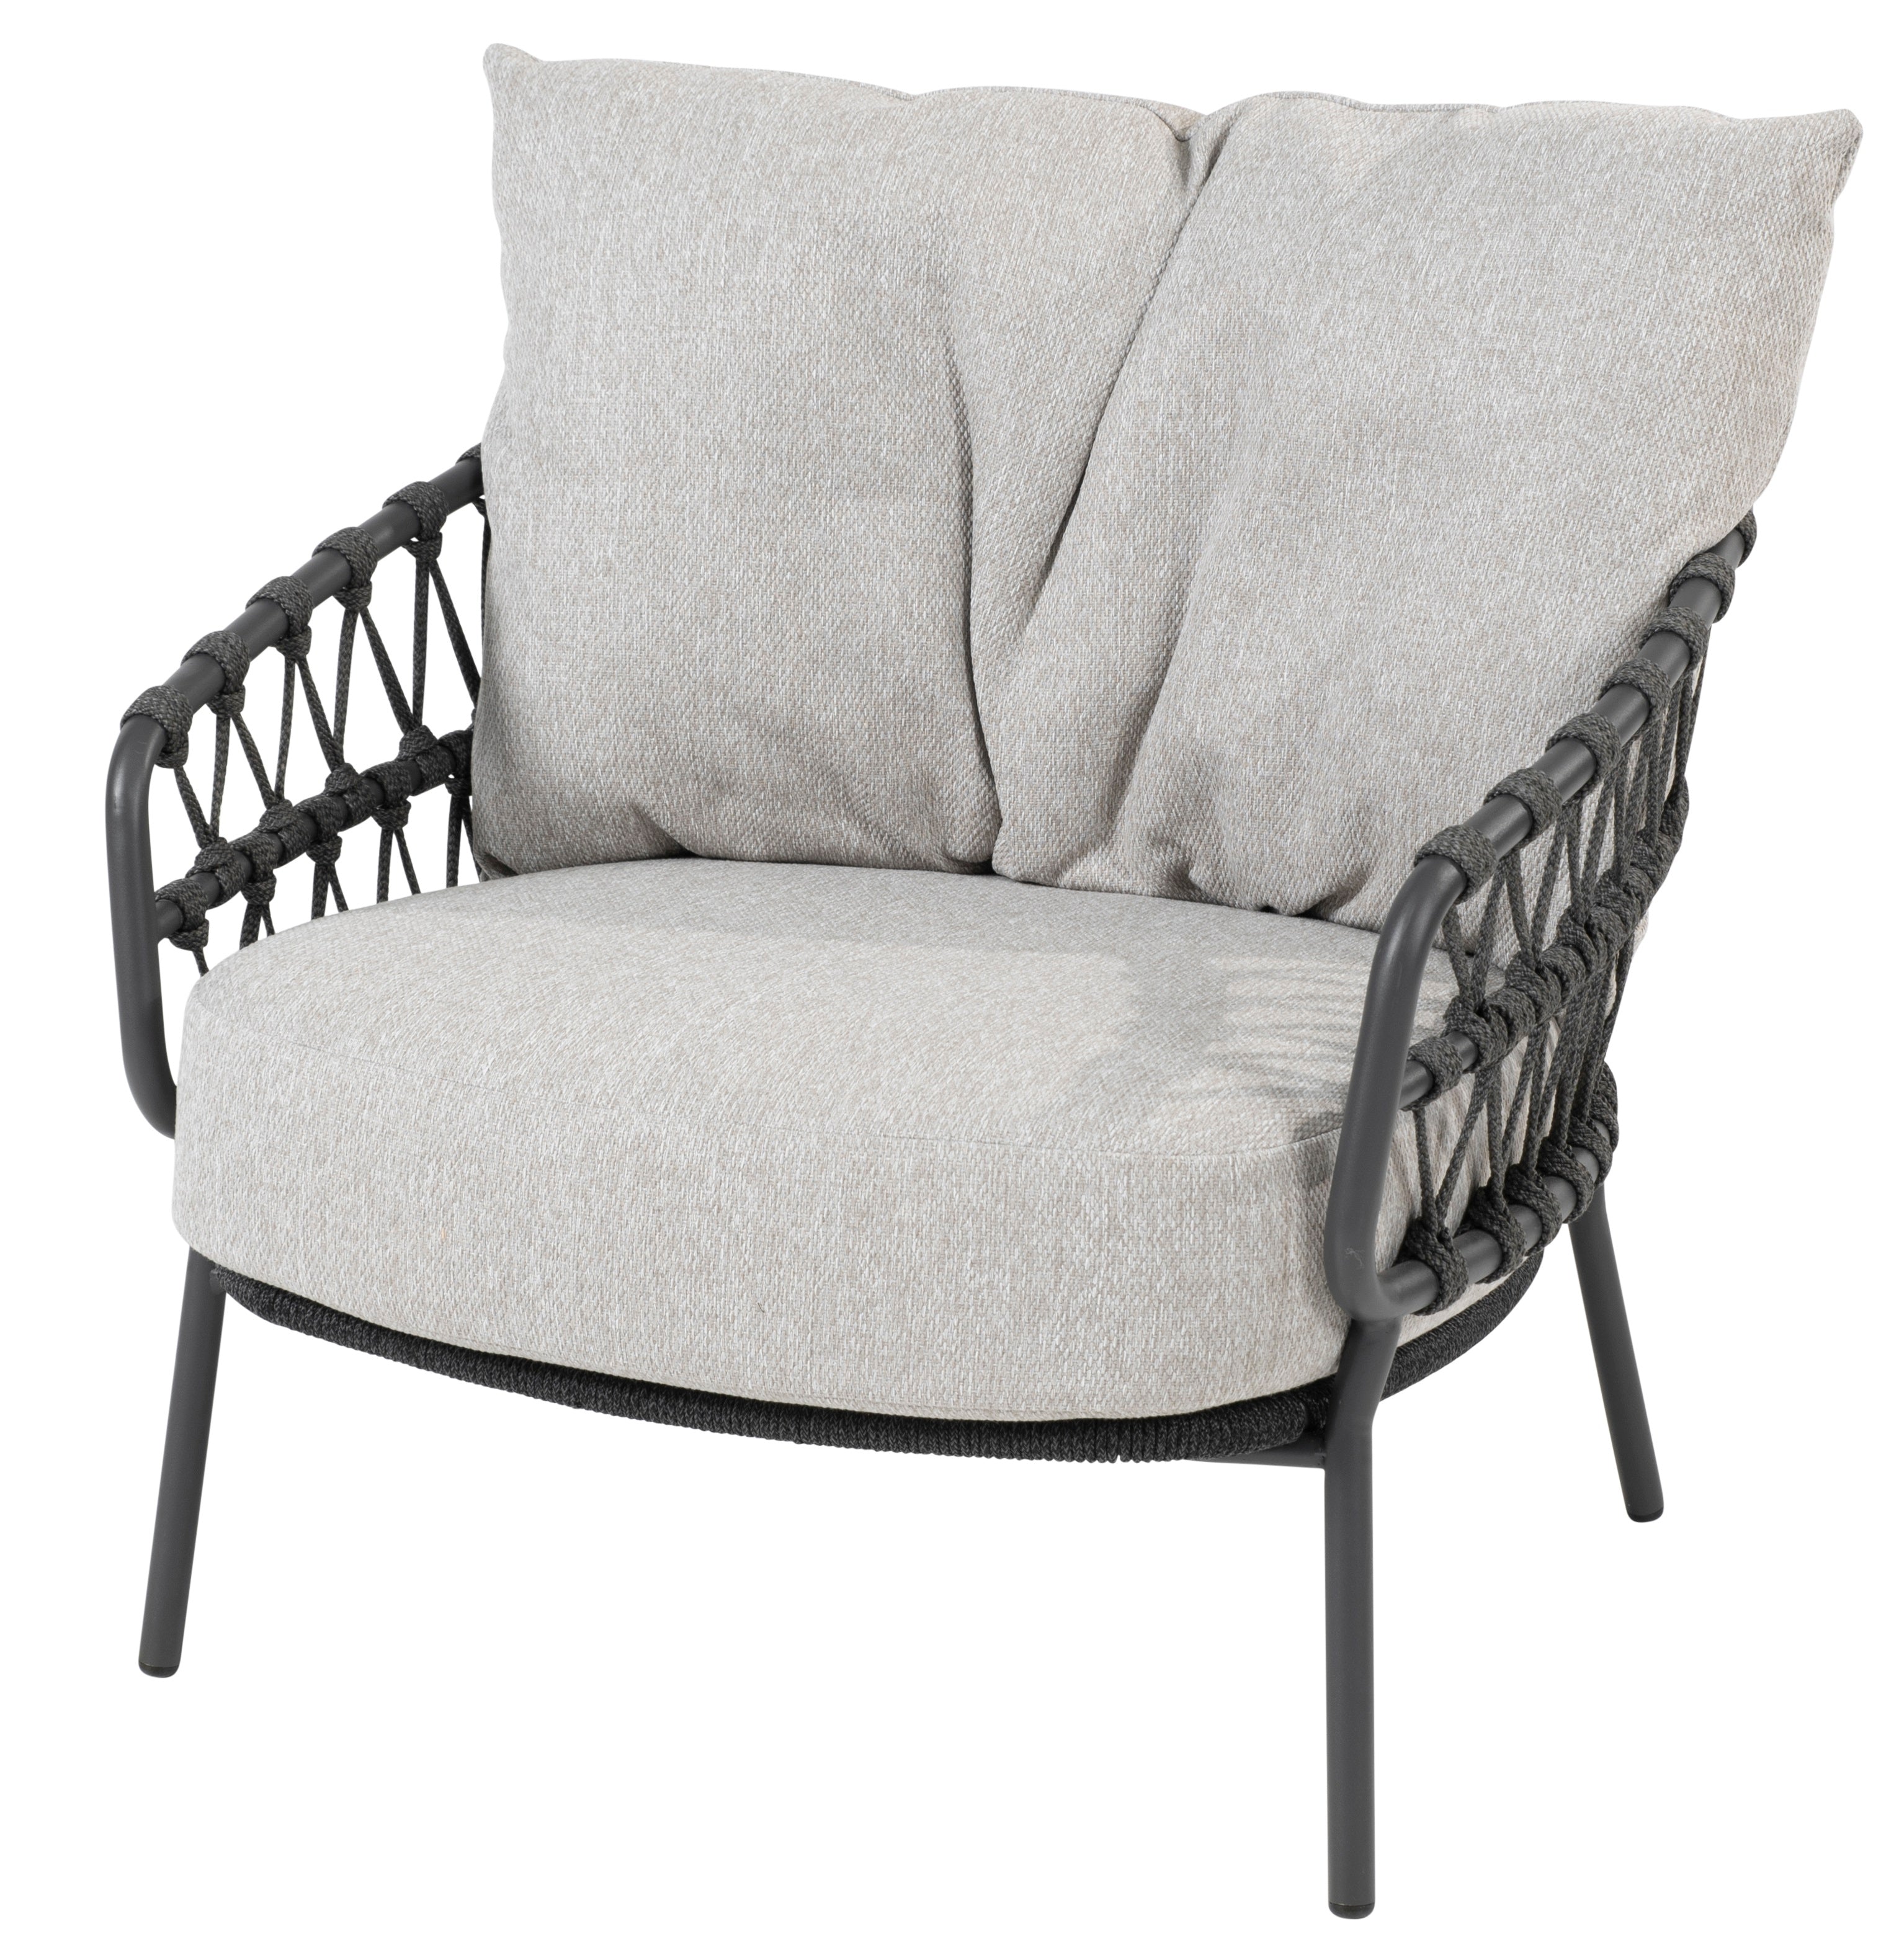 4 Seasons Outdoor Calpi Living Chair Anthracite With 2 Cushions